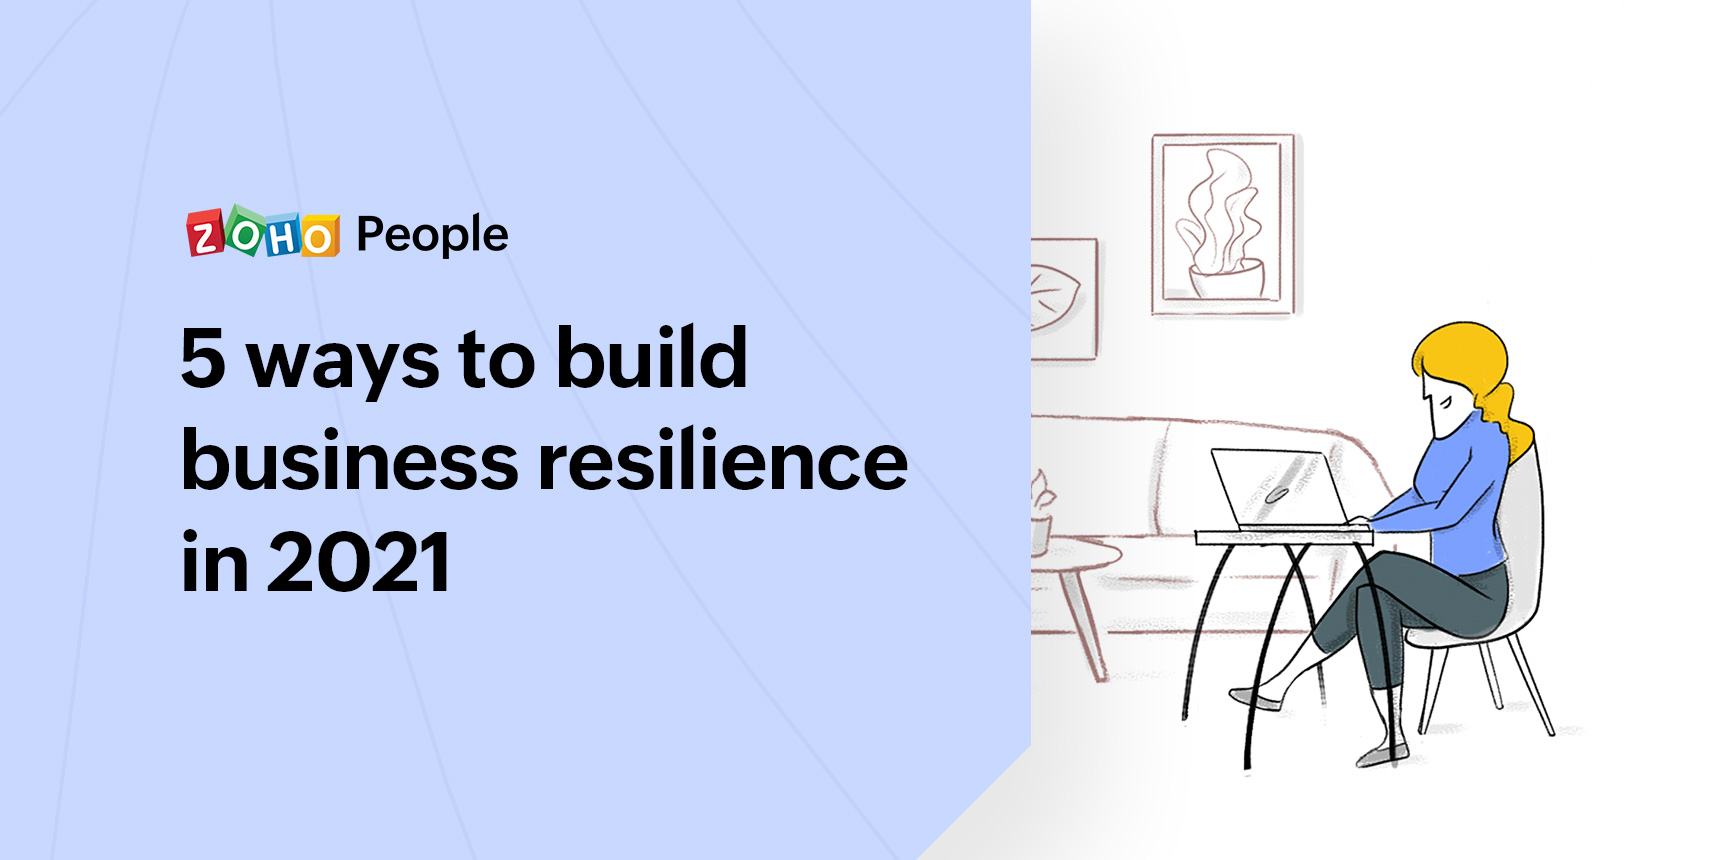 How businesses can build resilience in 2021